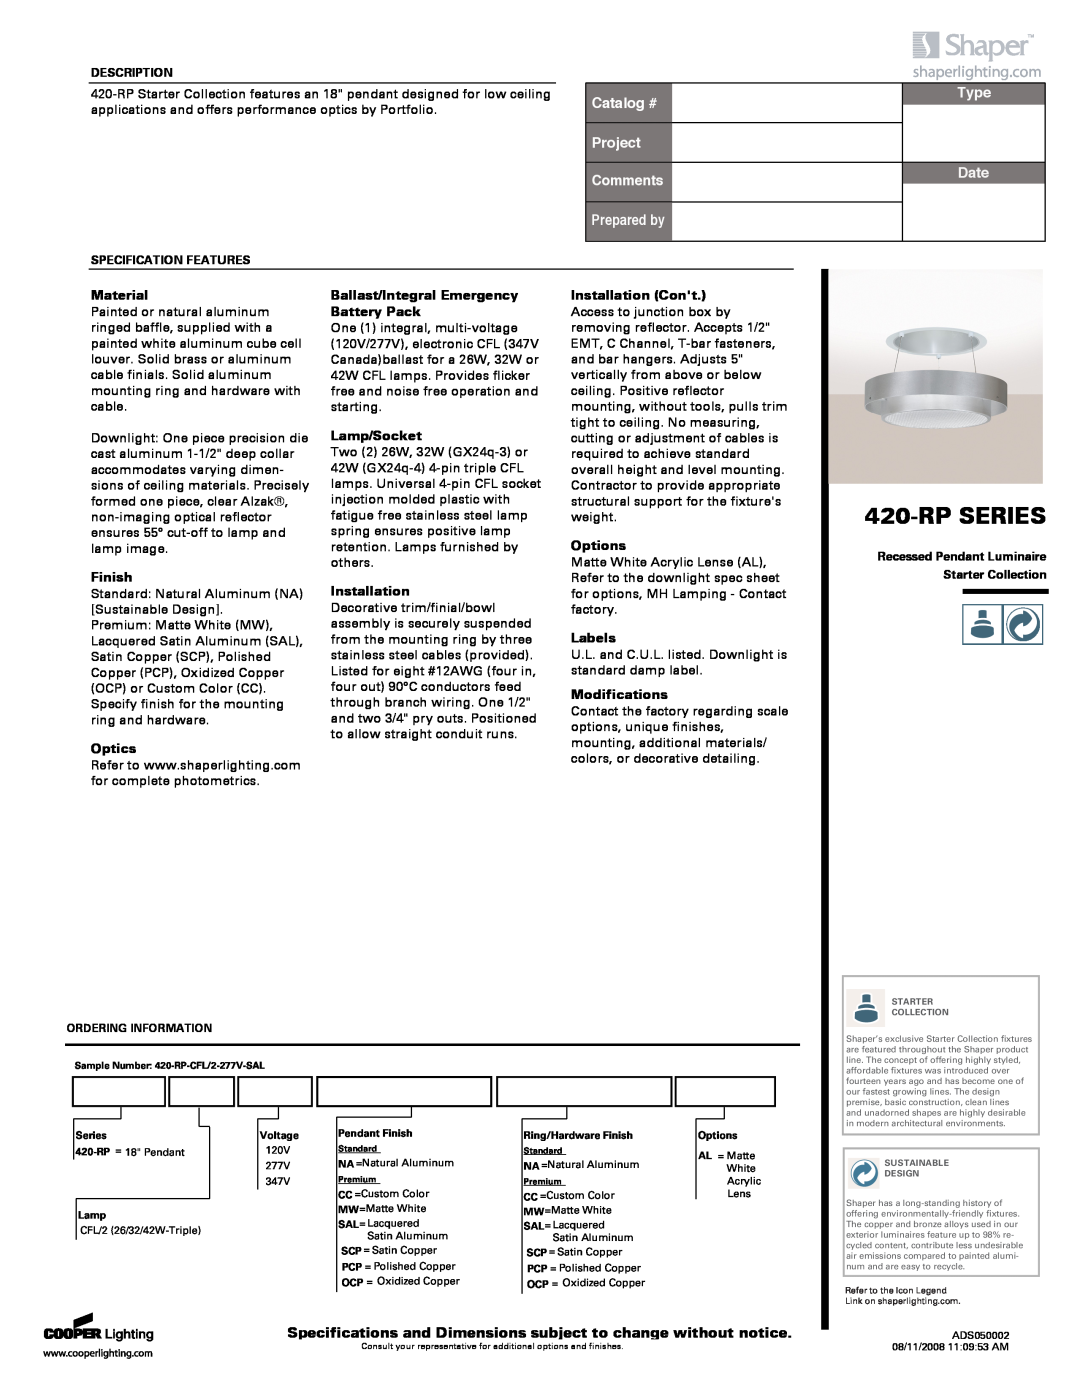 Cooper Lighting 420-RP SERIES specifications Rpseries, Catalog #, Project Comments, Prepared by, Type, Date 